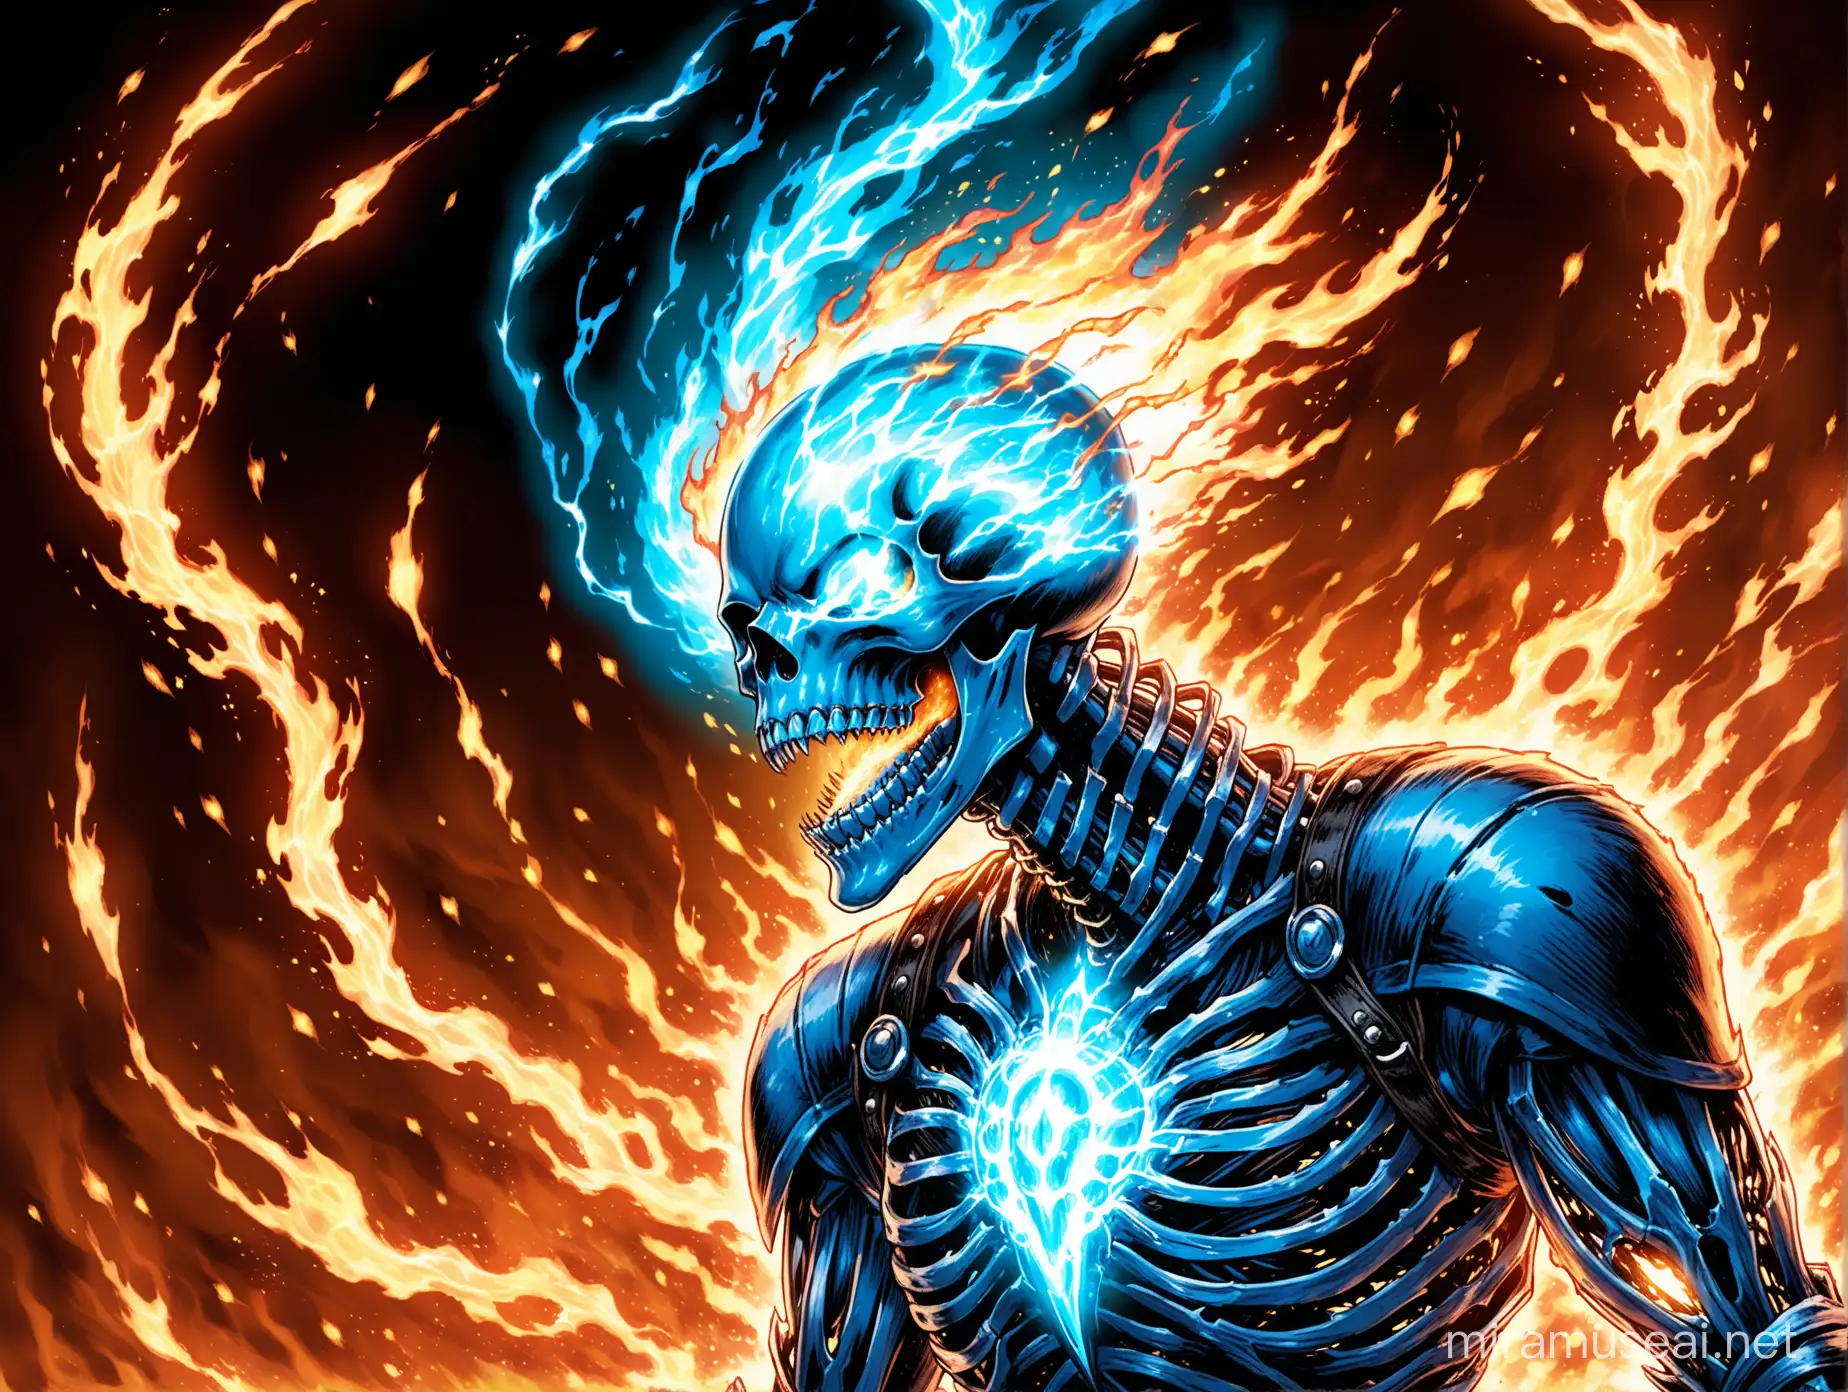 Ghost rider blue fire, CyberSkeleton only the Head Looking up, Jaw Wide Open Screaming, Blue and Rose Electricity flowing and bursting, Phasing Between human form and Cyberskeleton